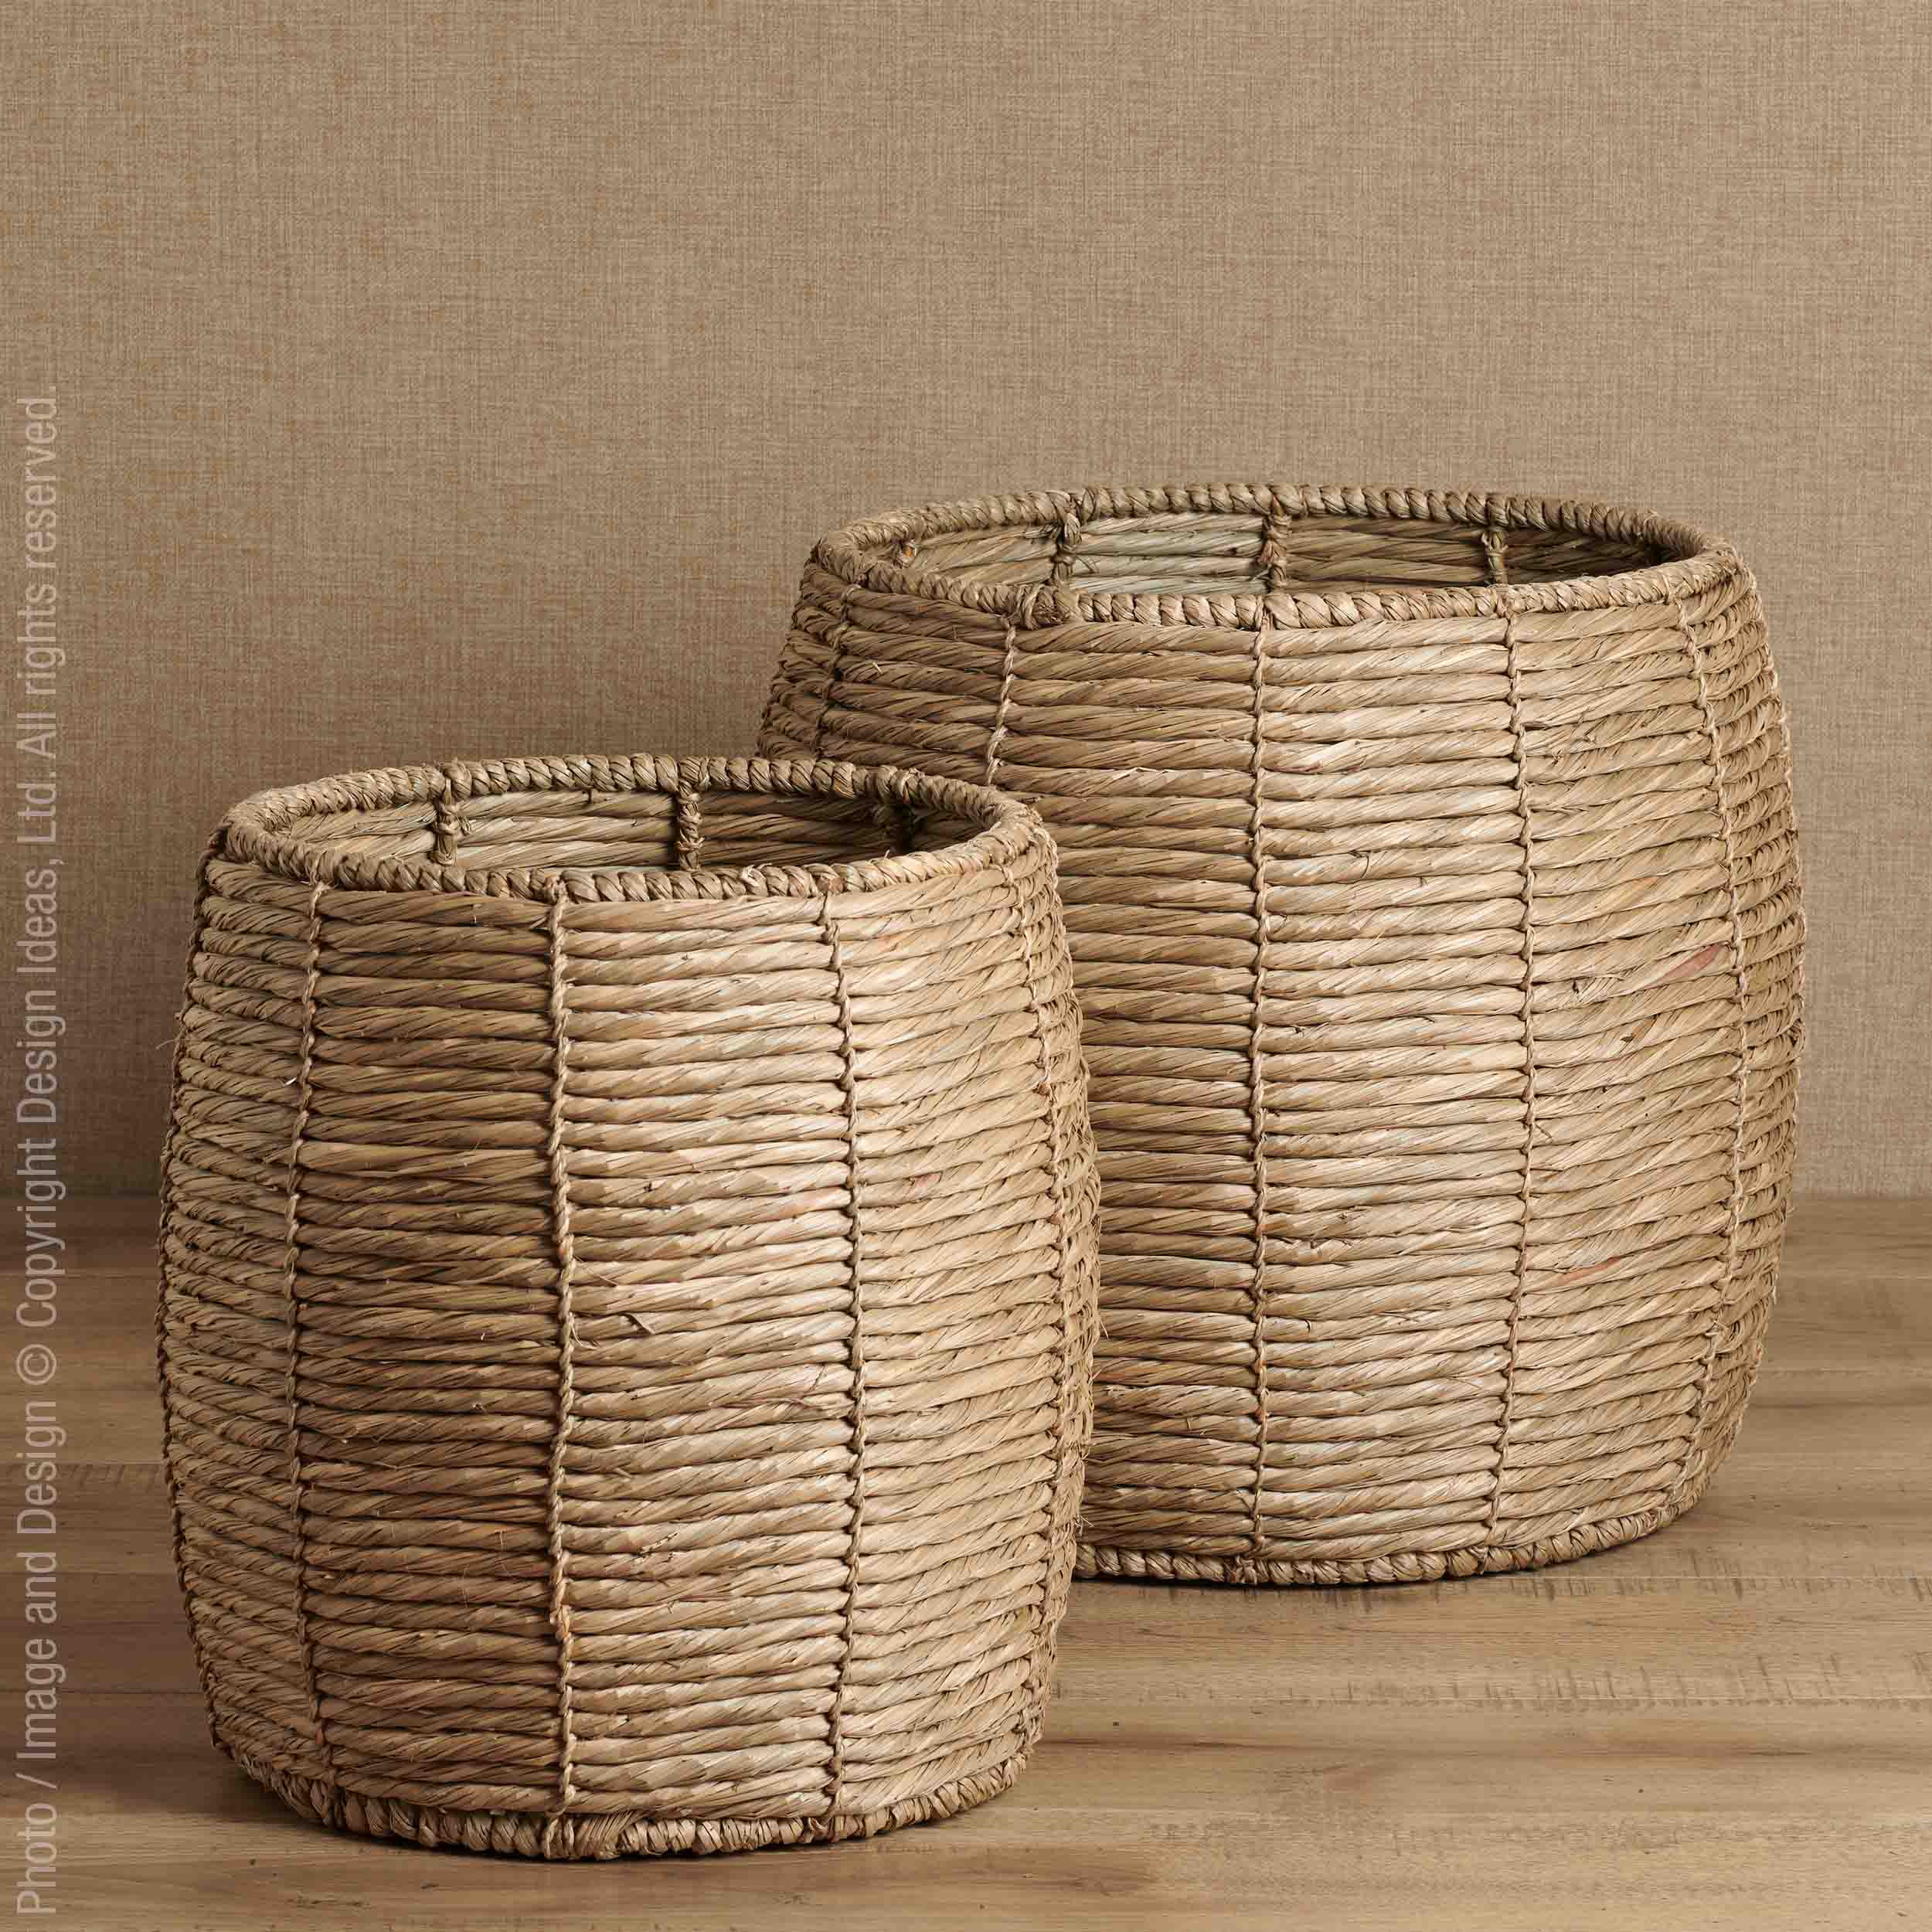 Bari™ baskets - Natural | Image 1 | Premium Basket from the Bari collection | made with Water Hyacinth Twine for long lasting use | texxture